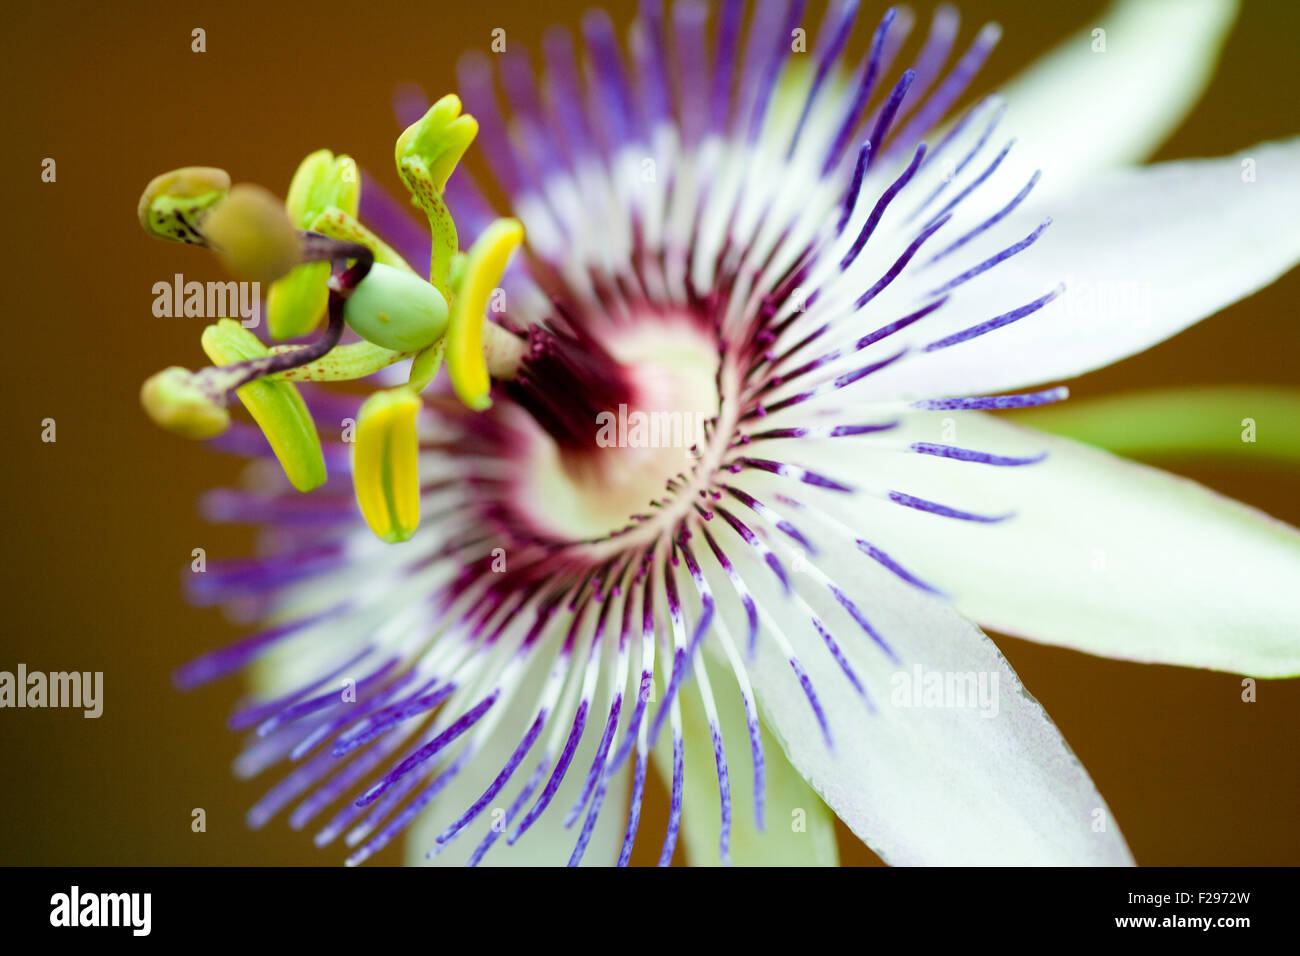 Detail of a purple passion flower. Stock Photo